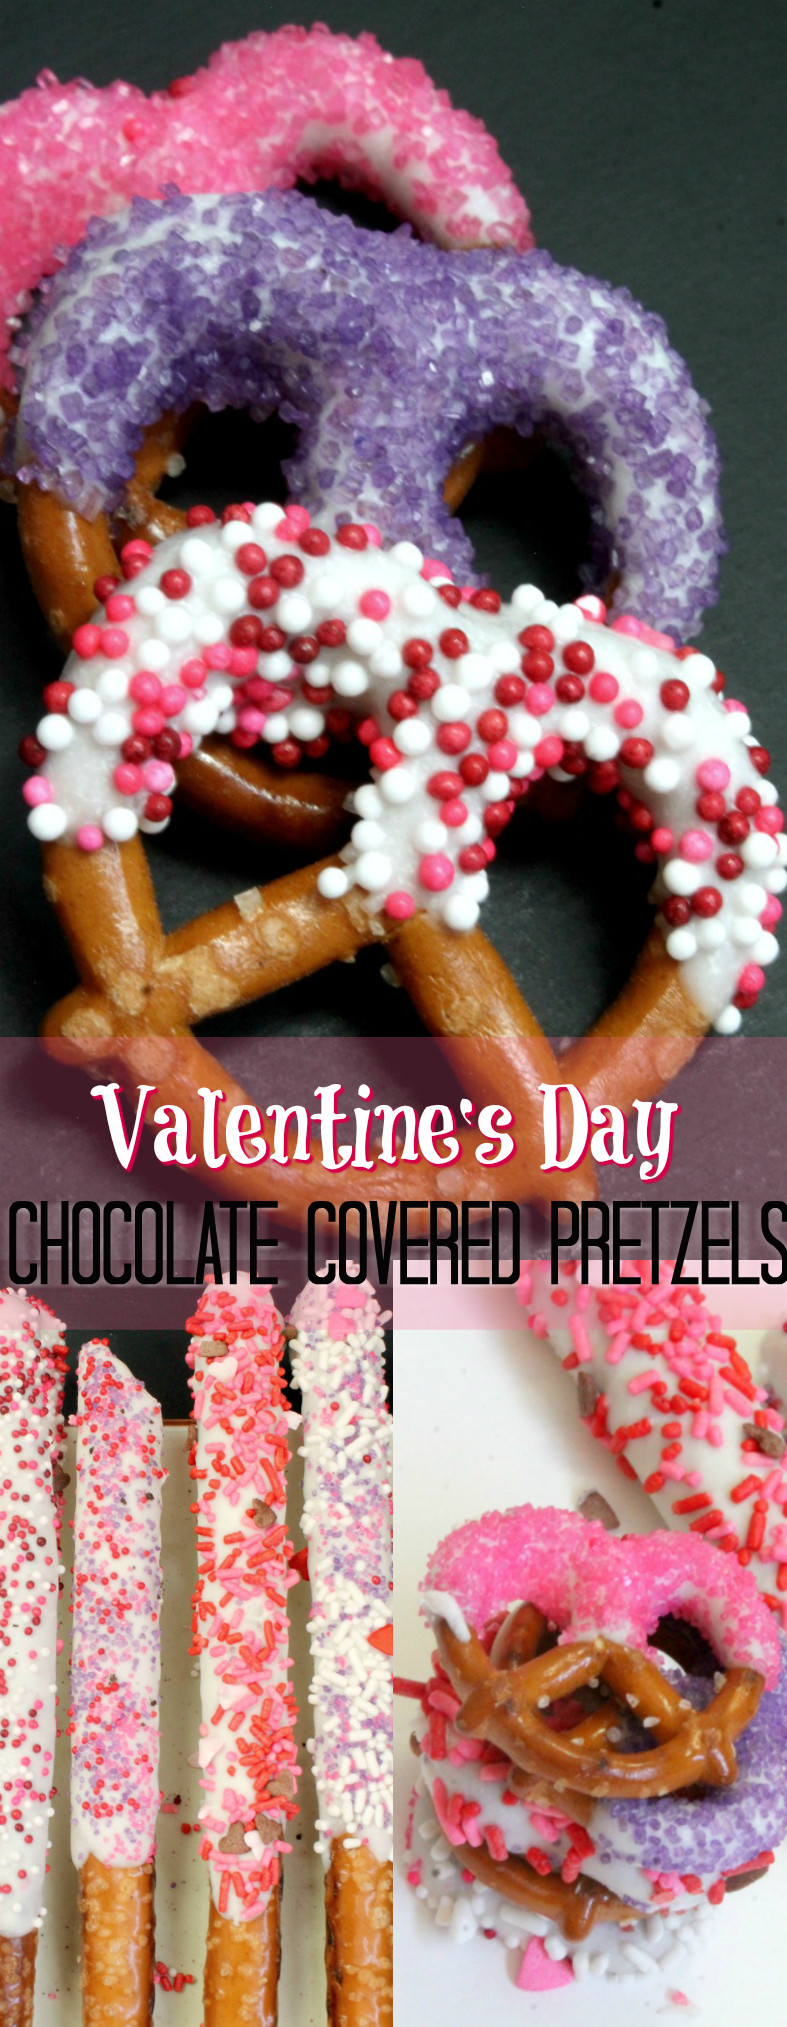 Chocolate Covered Pretzels For Valentines Day
 Valentine Dipped Pretzels Kid Friendly Valentine Recipes